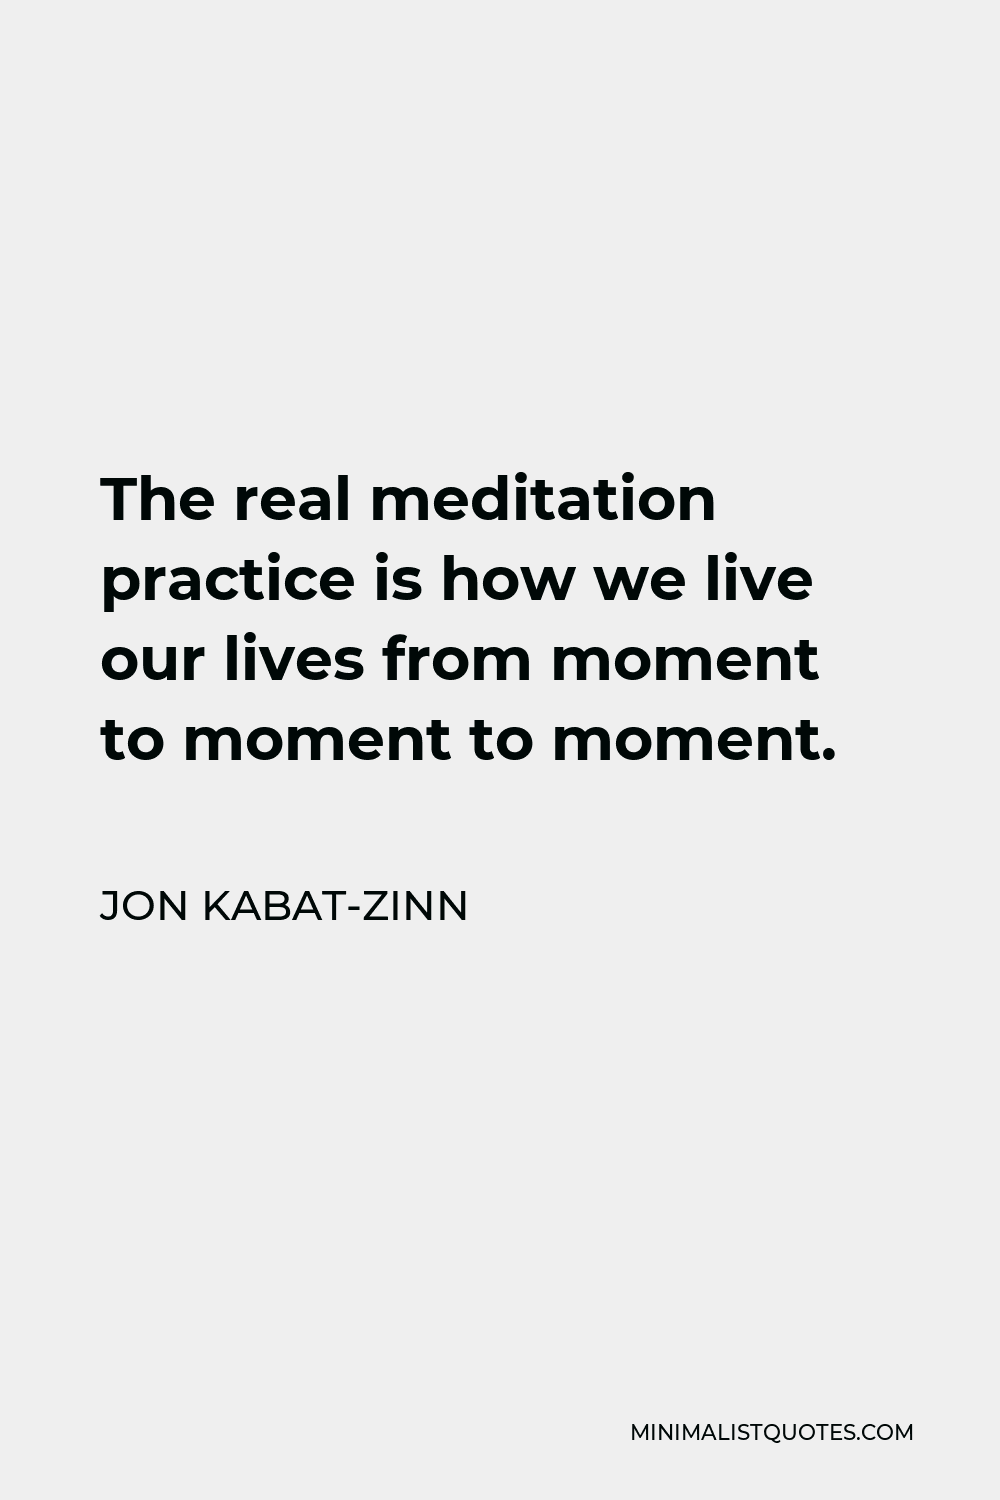 Jon Kabat-Zinn Quote - The real meditation practice is how we live our lives from moment to moment to moment.